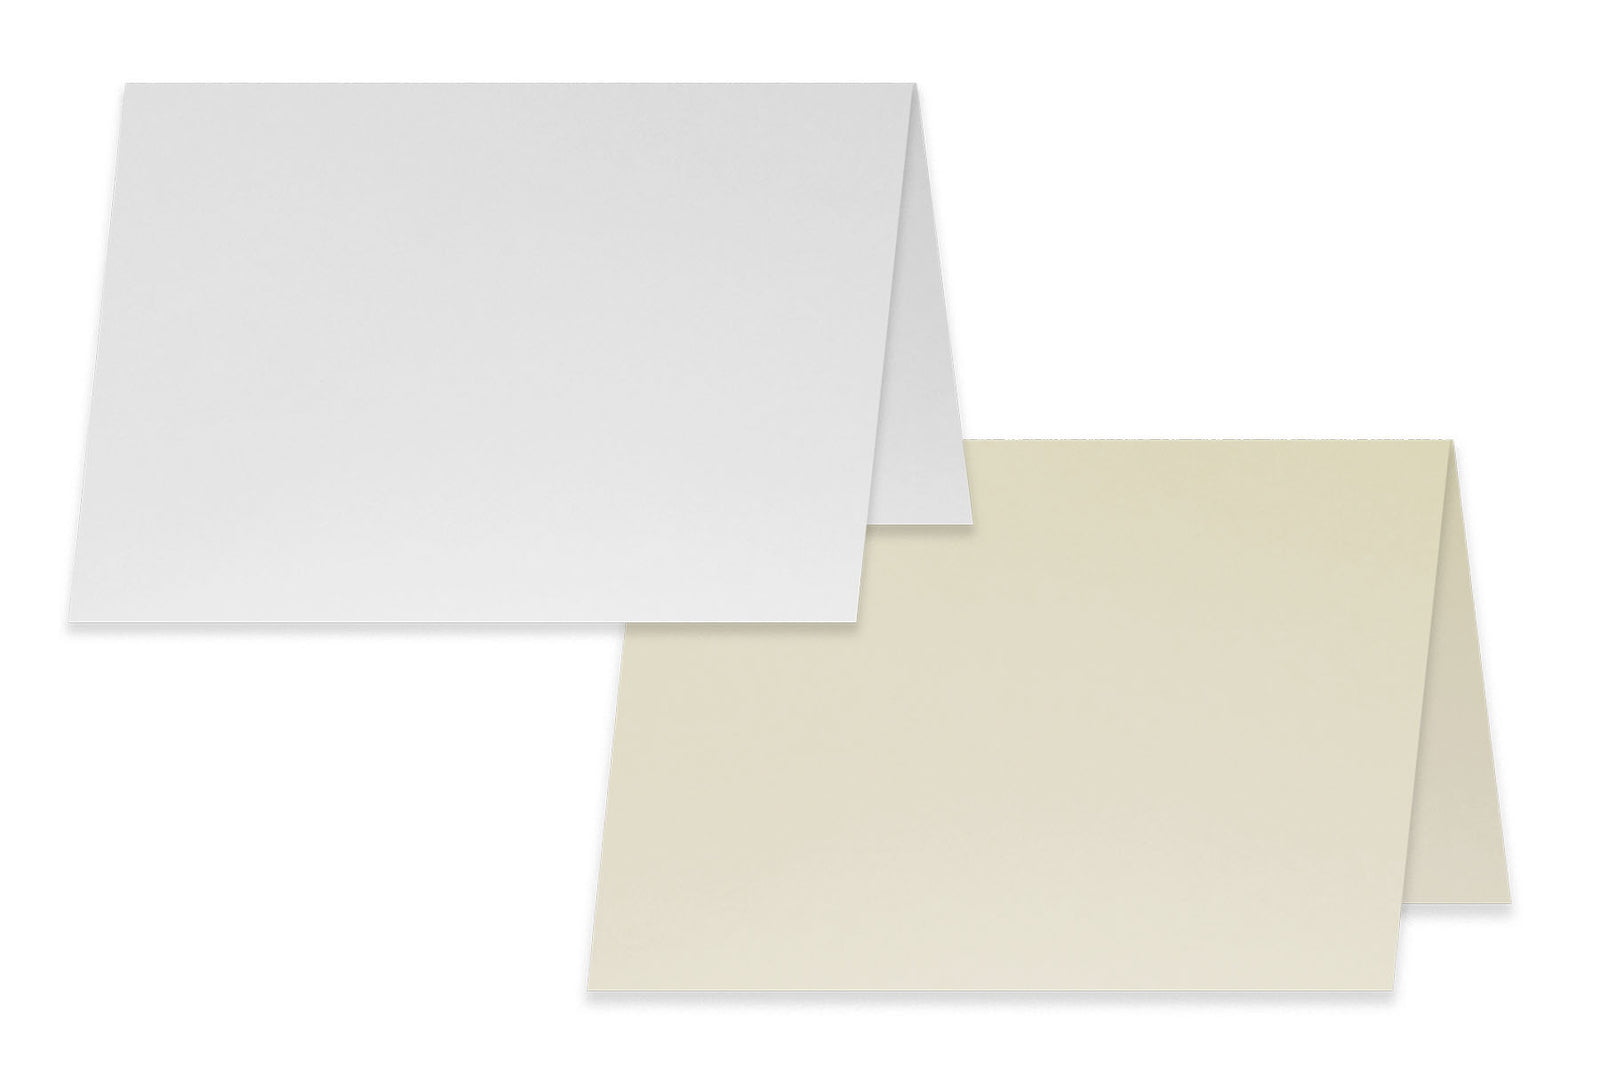  Blank 5 X 7 Cardstock and Envelopes - Ivory/Cream